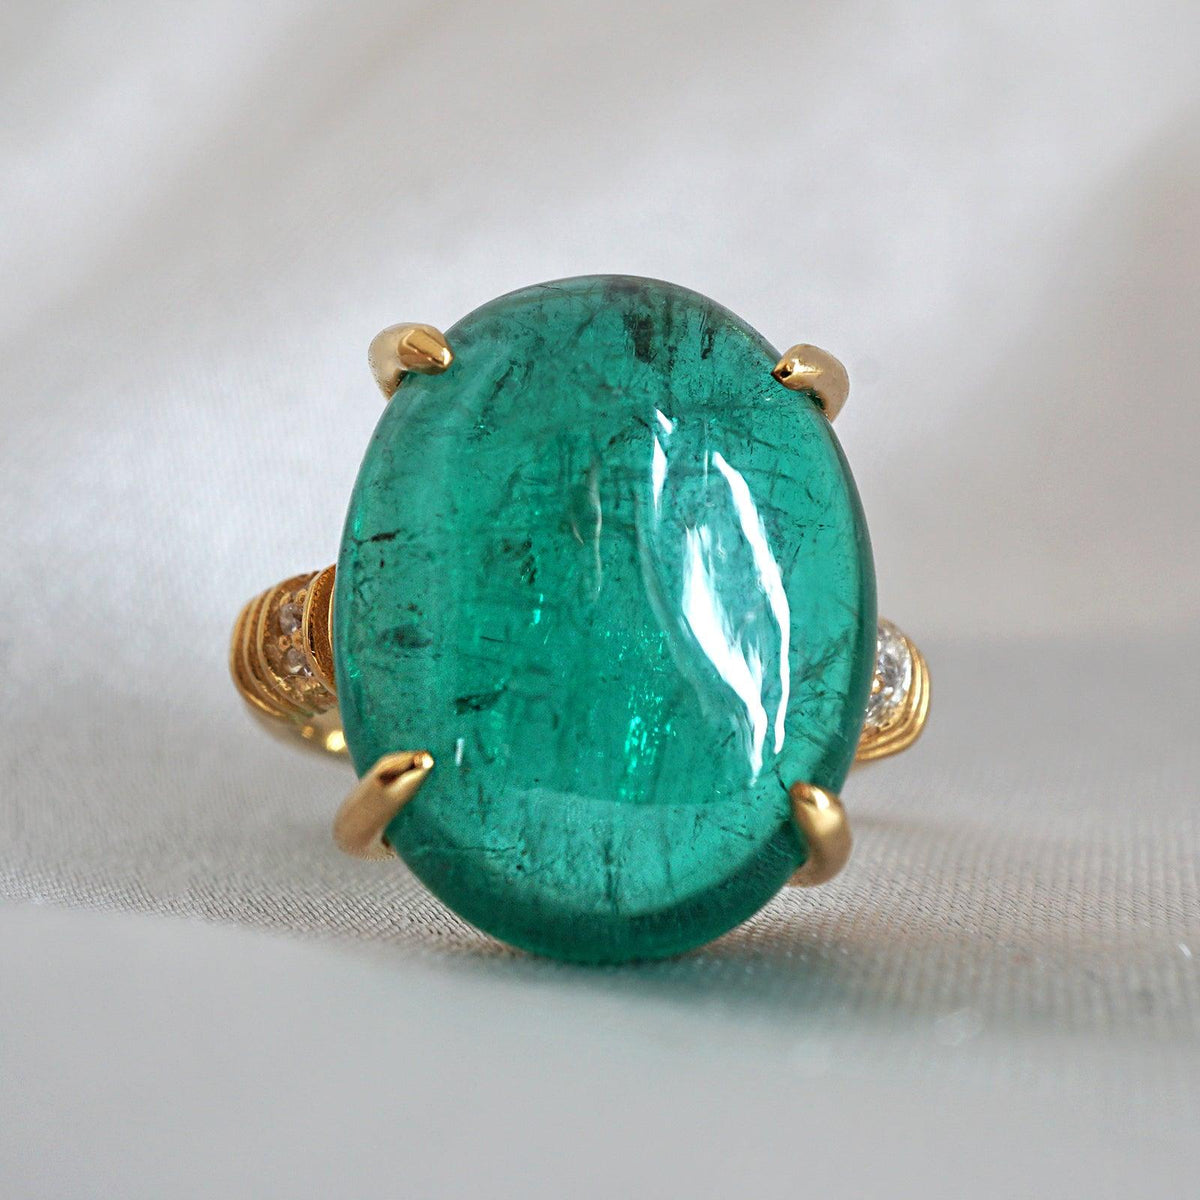 One Of A Kind: Oval Cabochon Emerald Diamond ring, 9ct - Tippy Taste Jewelry